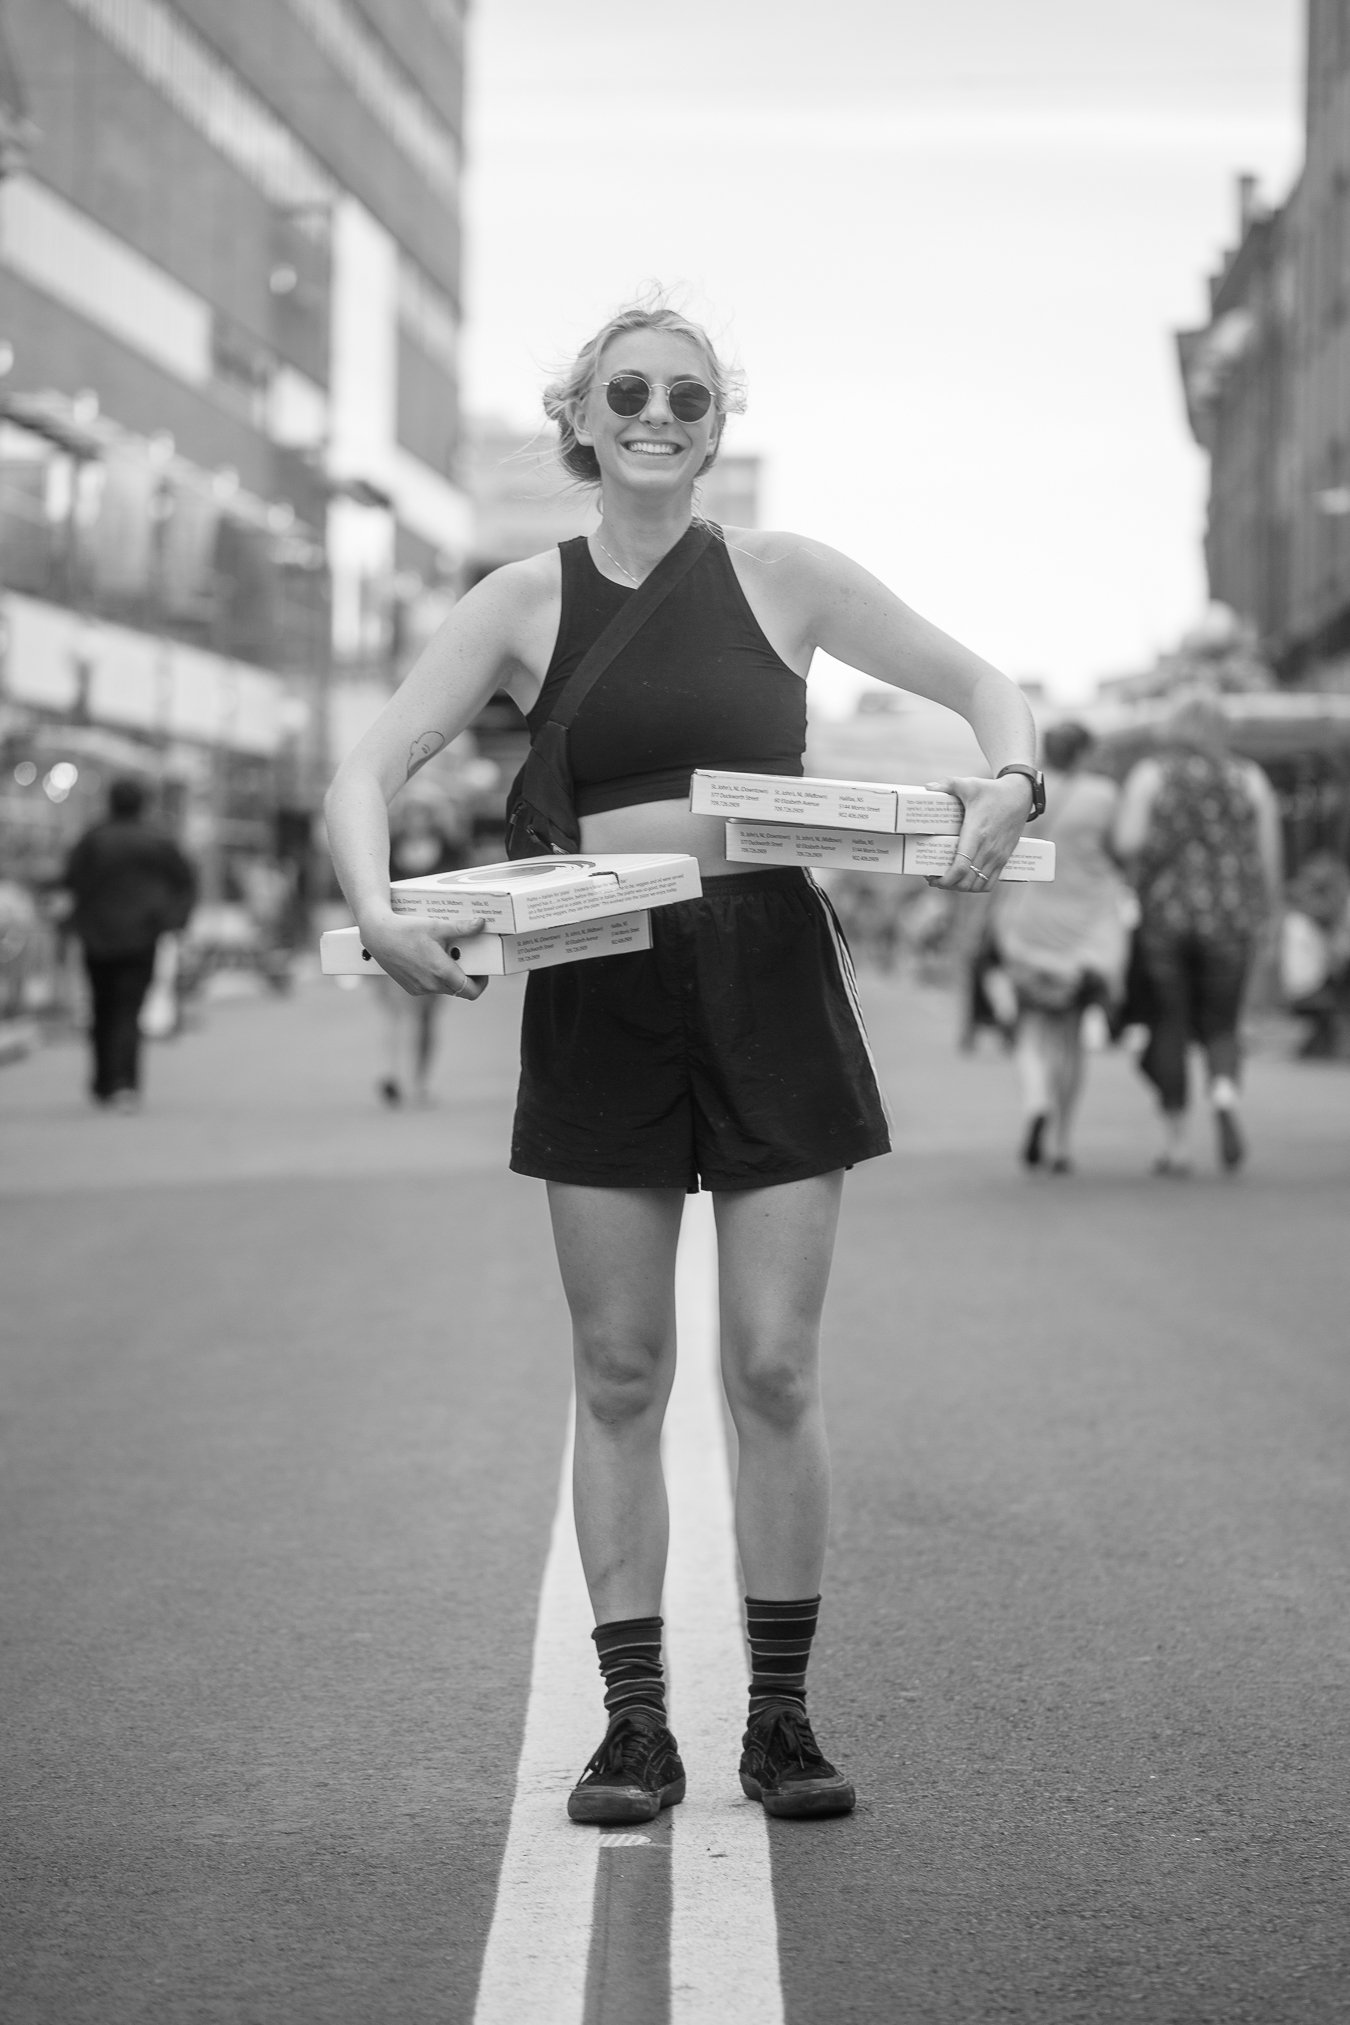 Joanna and her Pizza arms - Water Street Pedestrian Mall - 2021